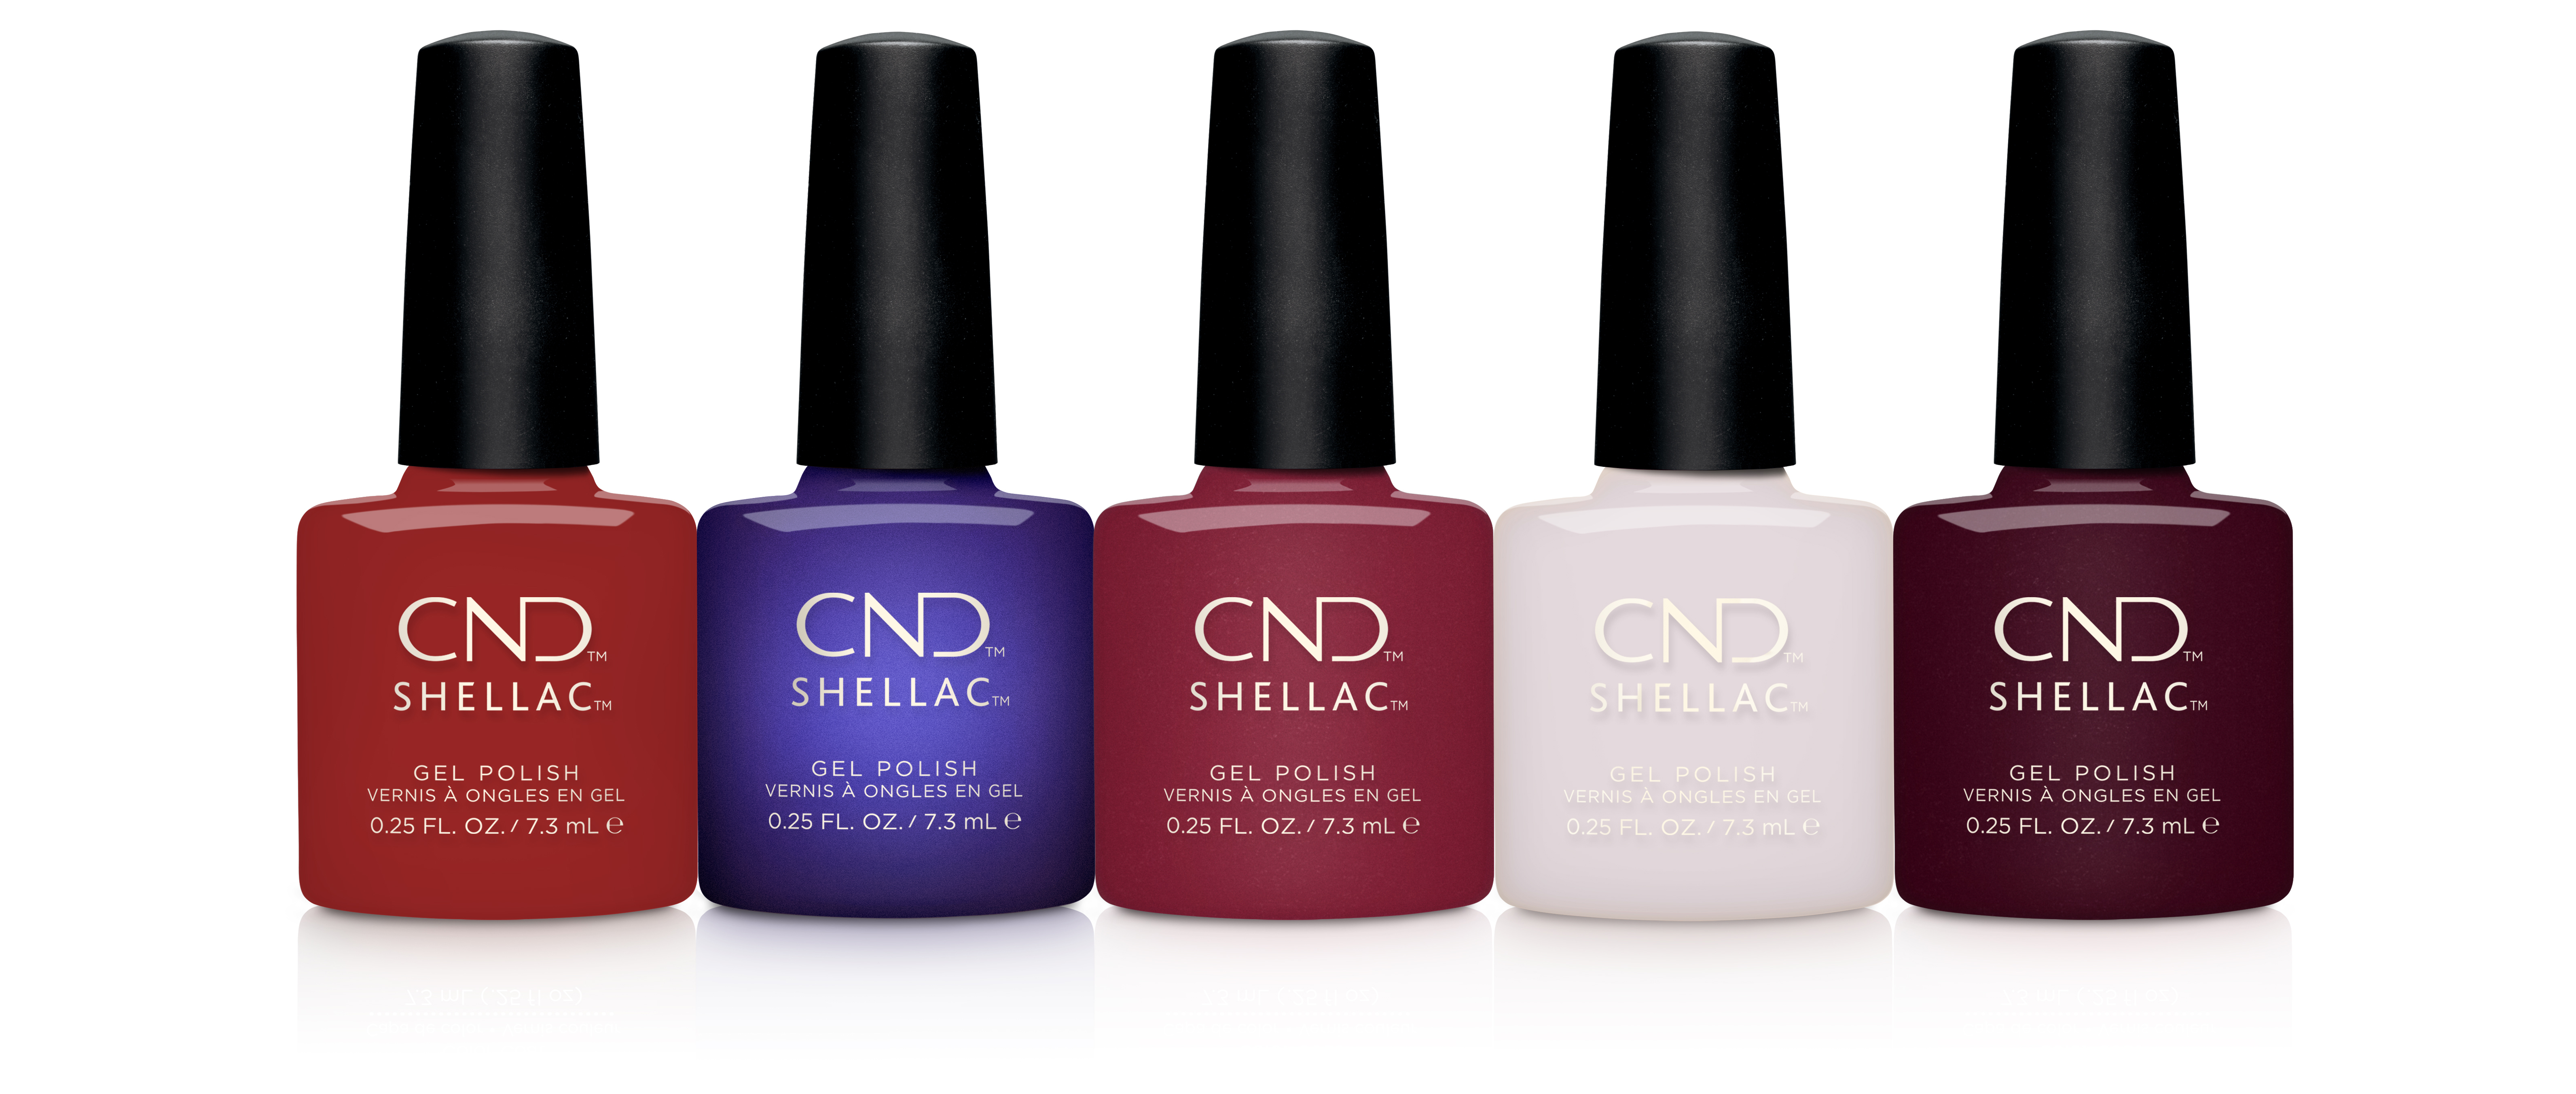 CND Shellac Iconic Collection